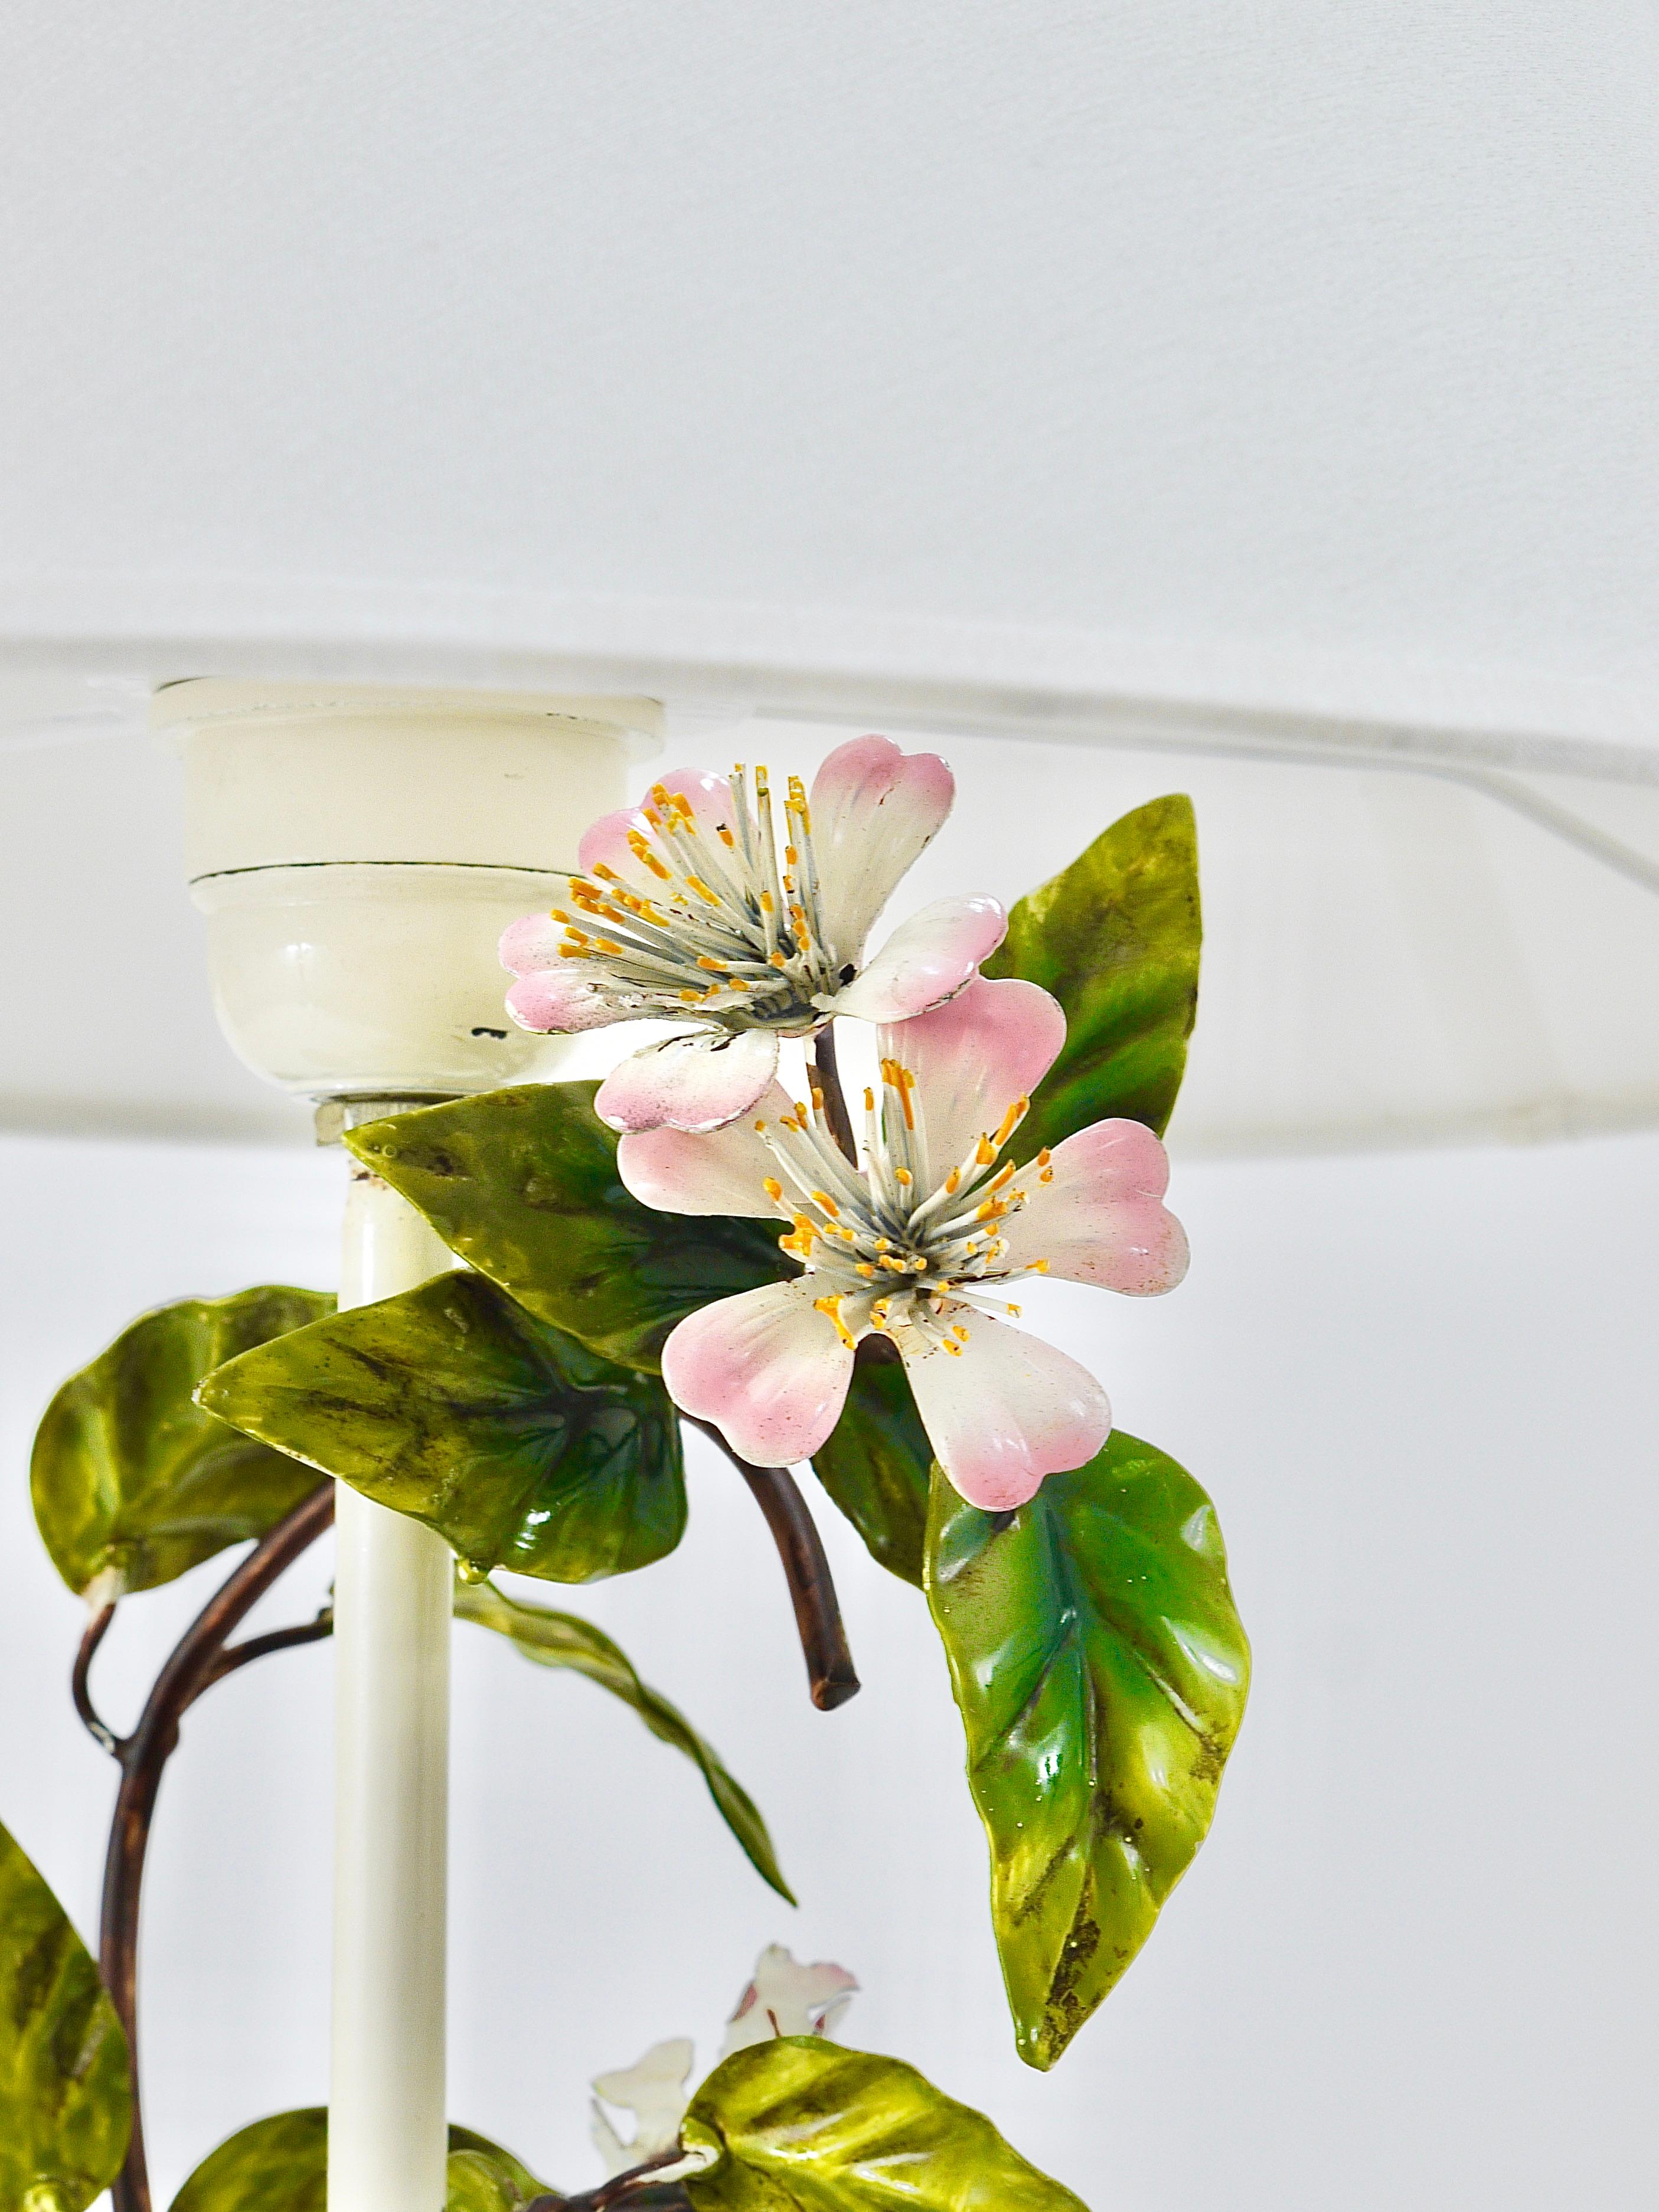 Salvadori Hand Painted Wild Apple Blossom Toleware Table Lamp, Italy, 1950s For Sale 6